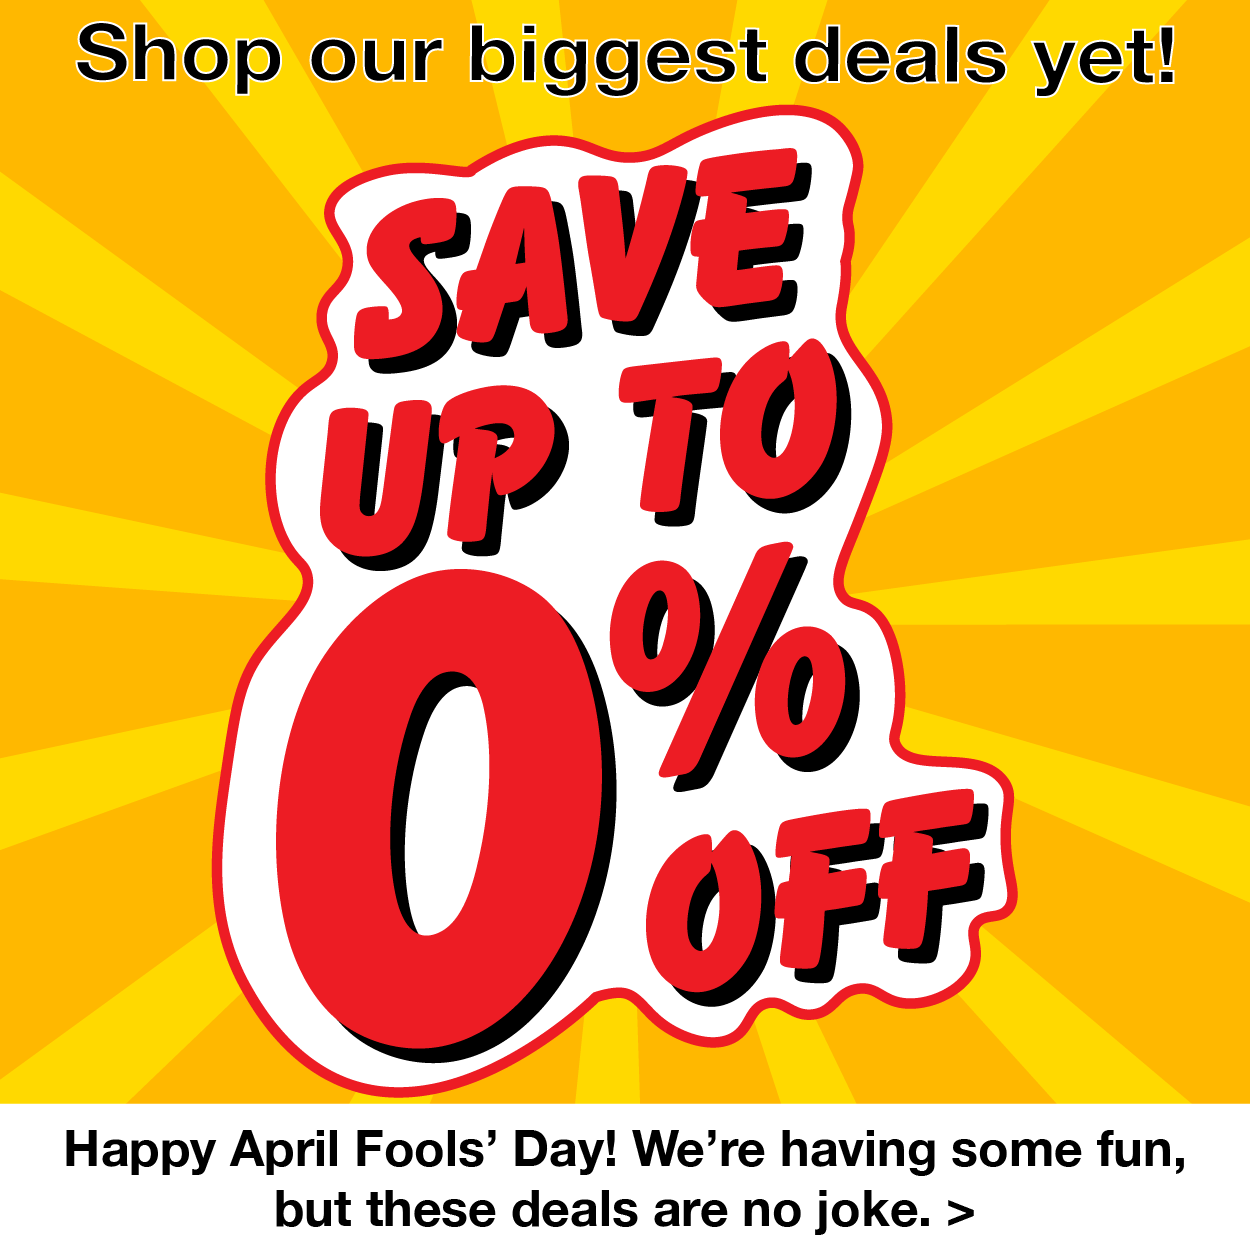 Save up to 0% off! wow!